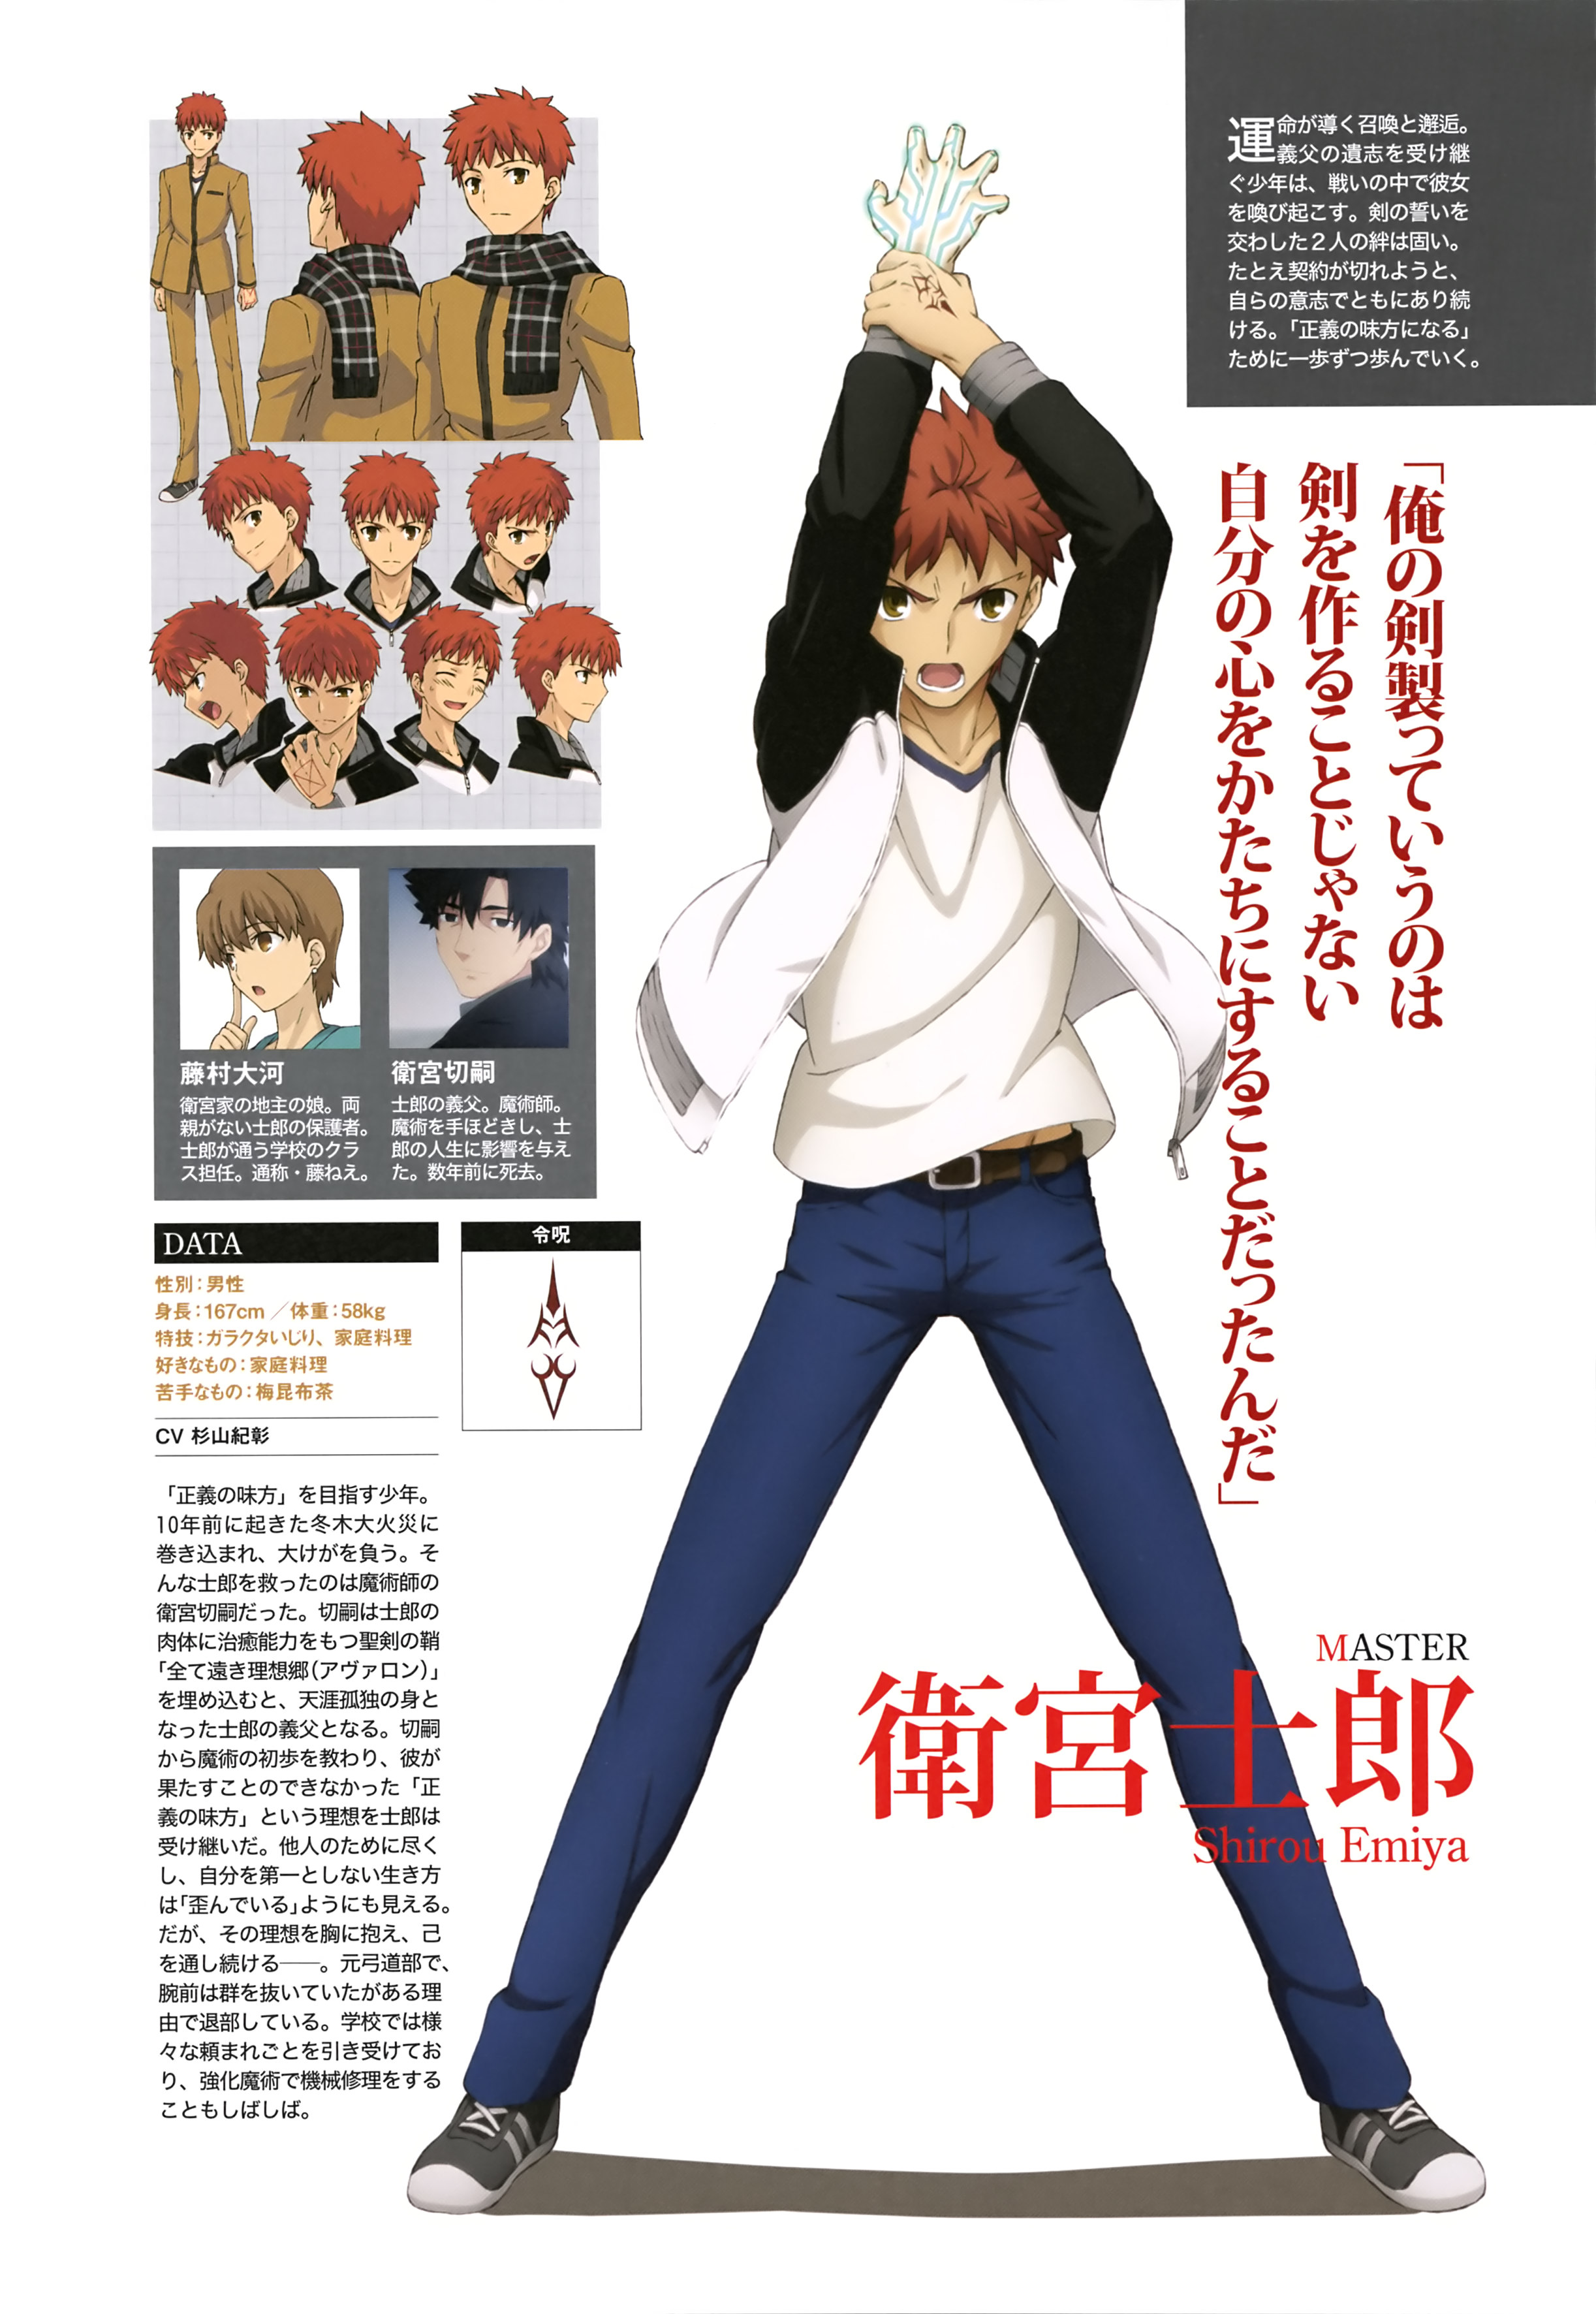 Fate Stay Night Unlimited Blade Works Animation Guide Book Yande Re